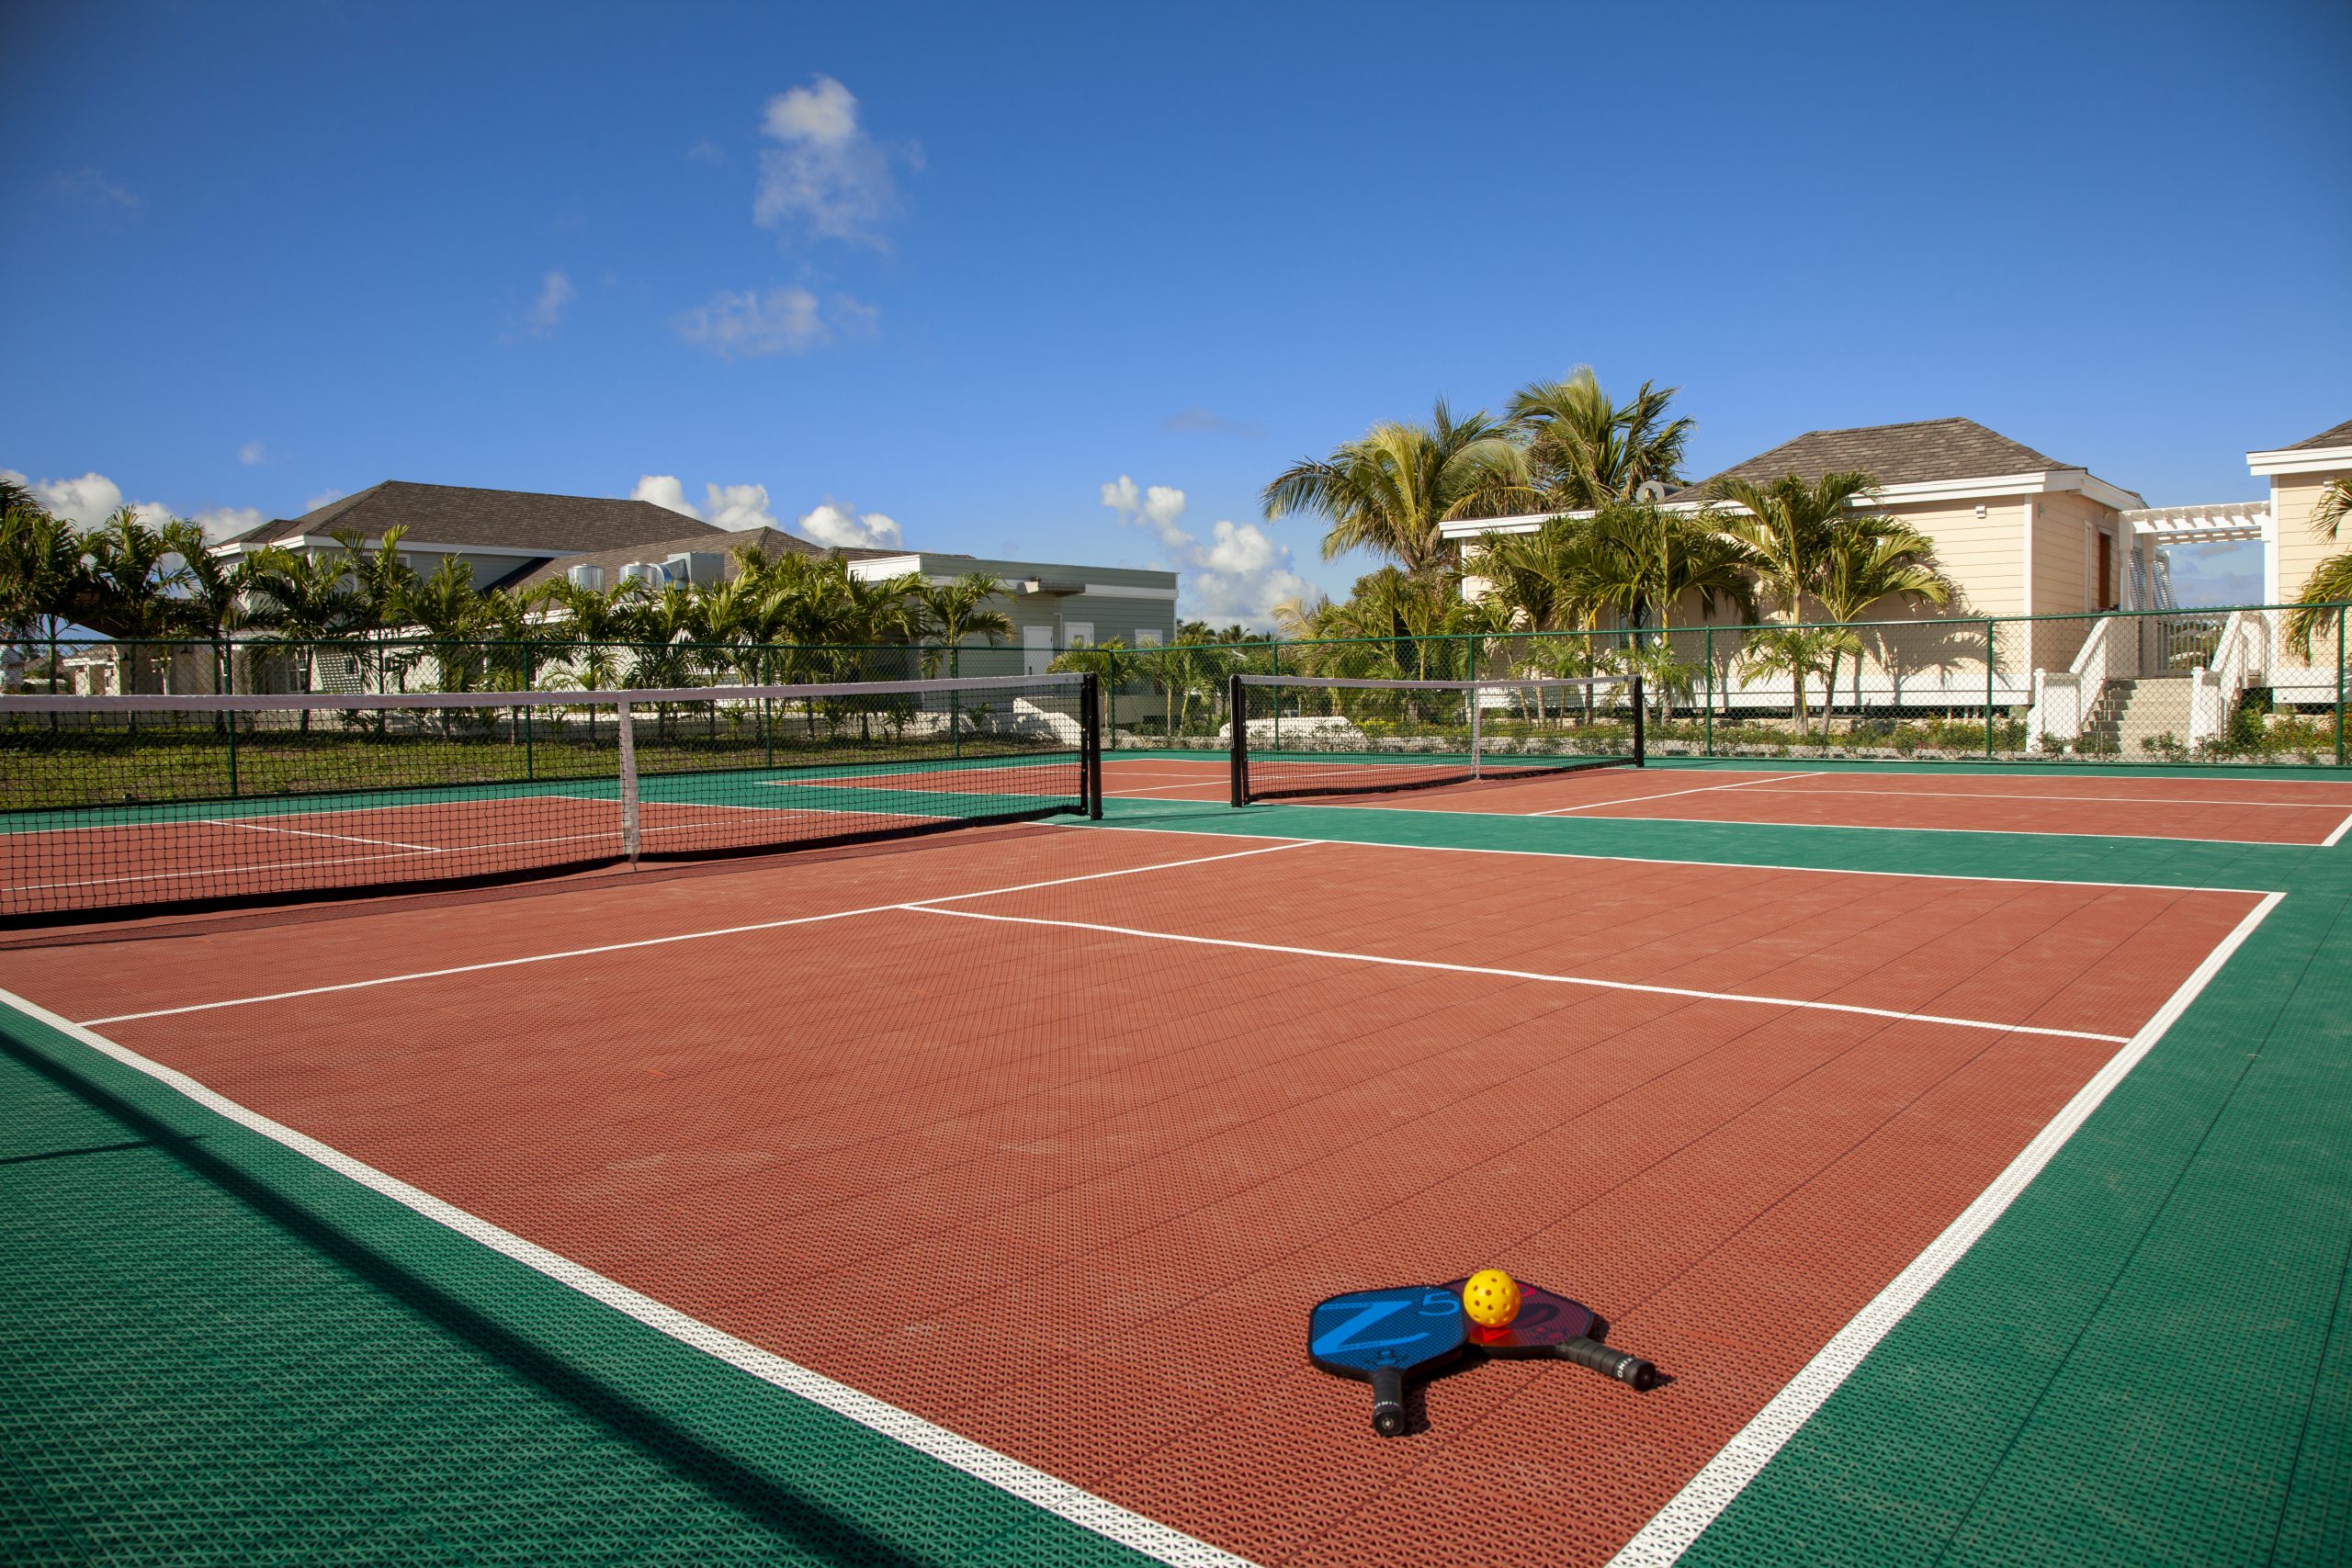 More resorts are adding pickleball courts as an amenity for guests